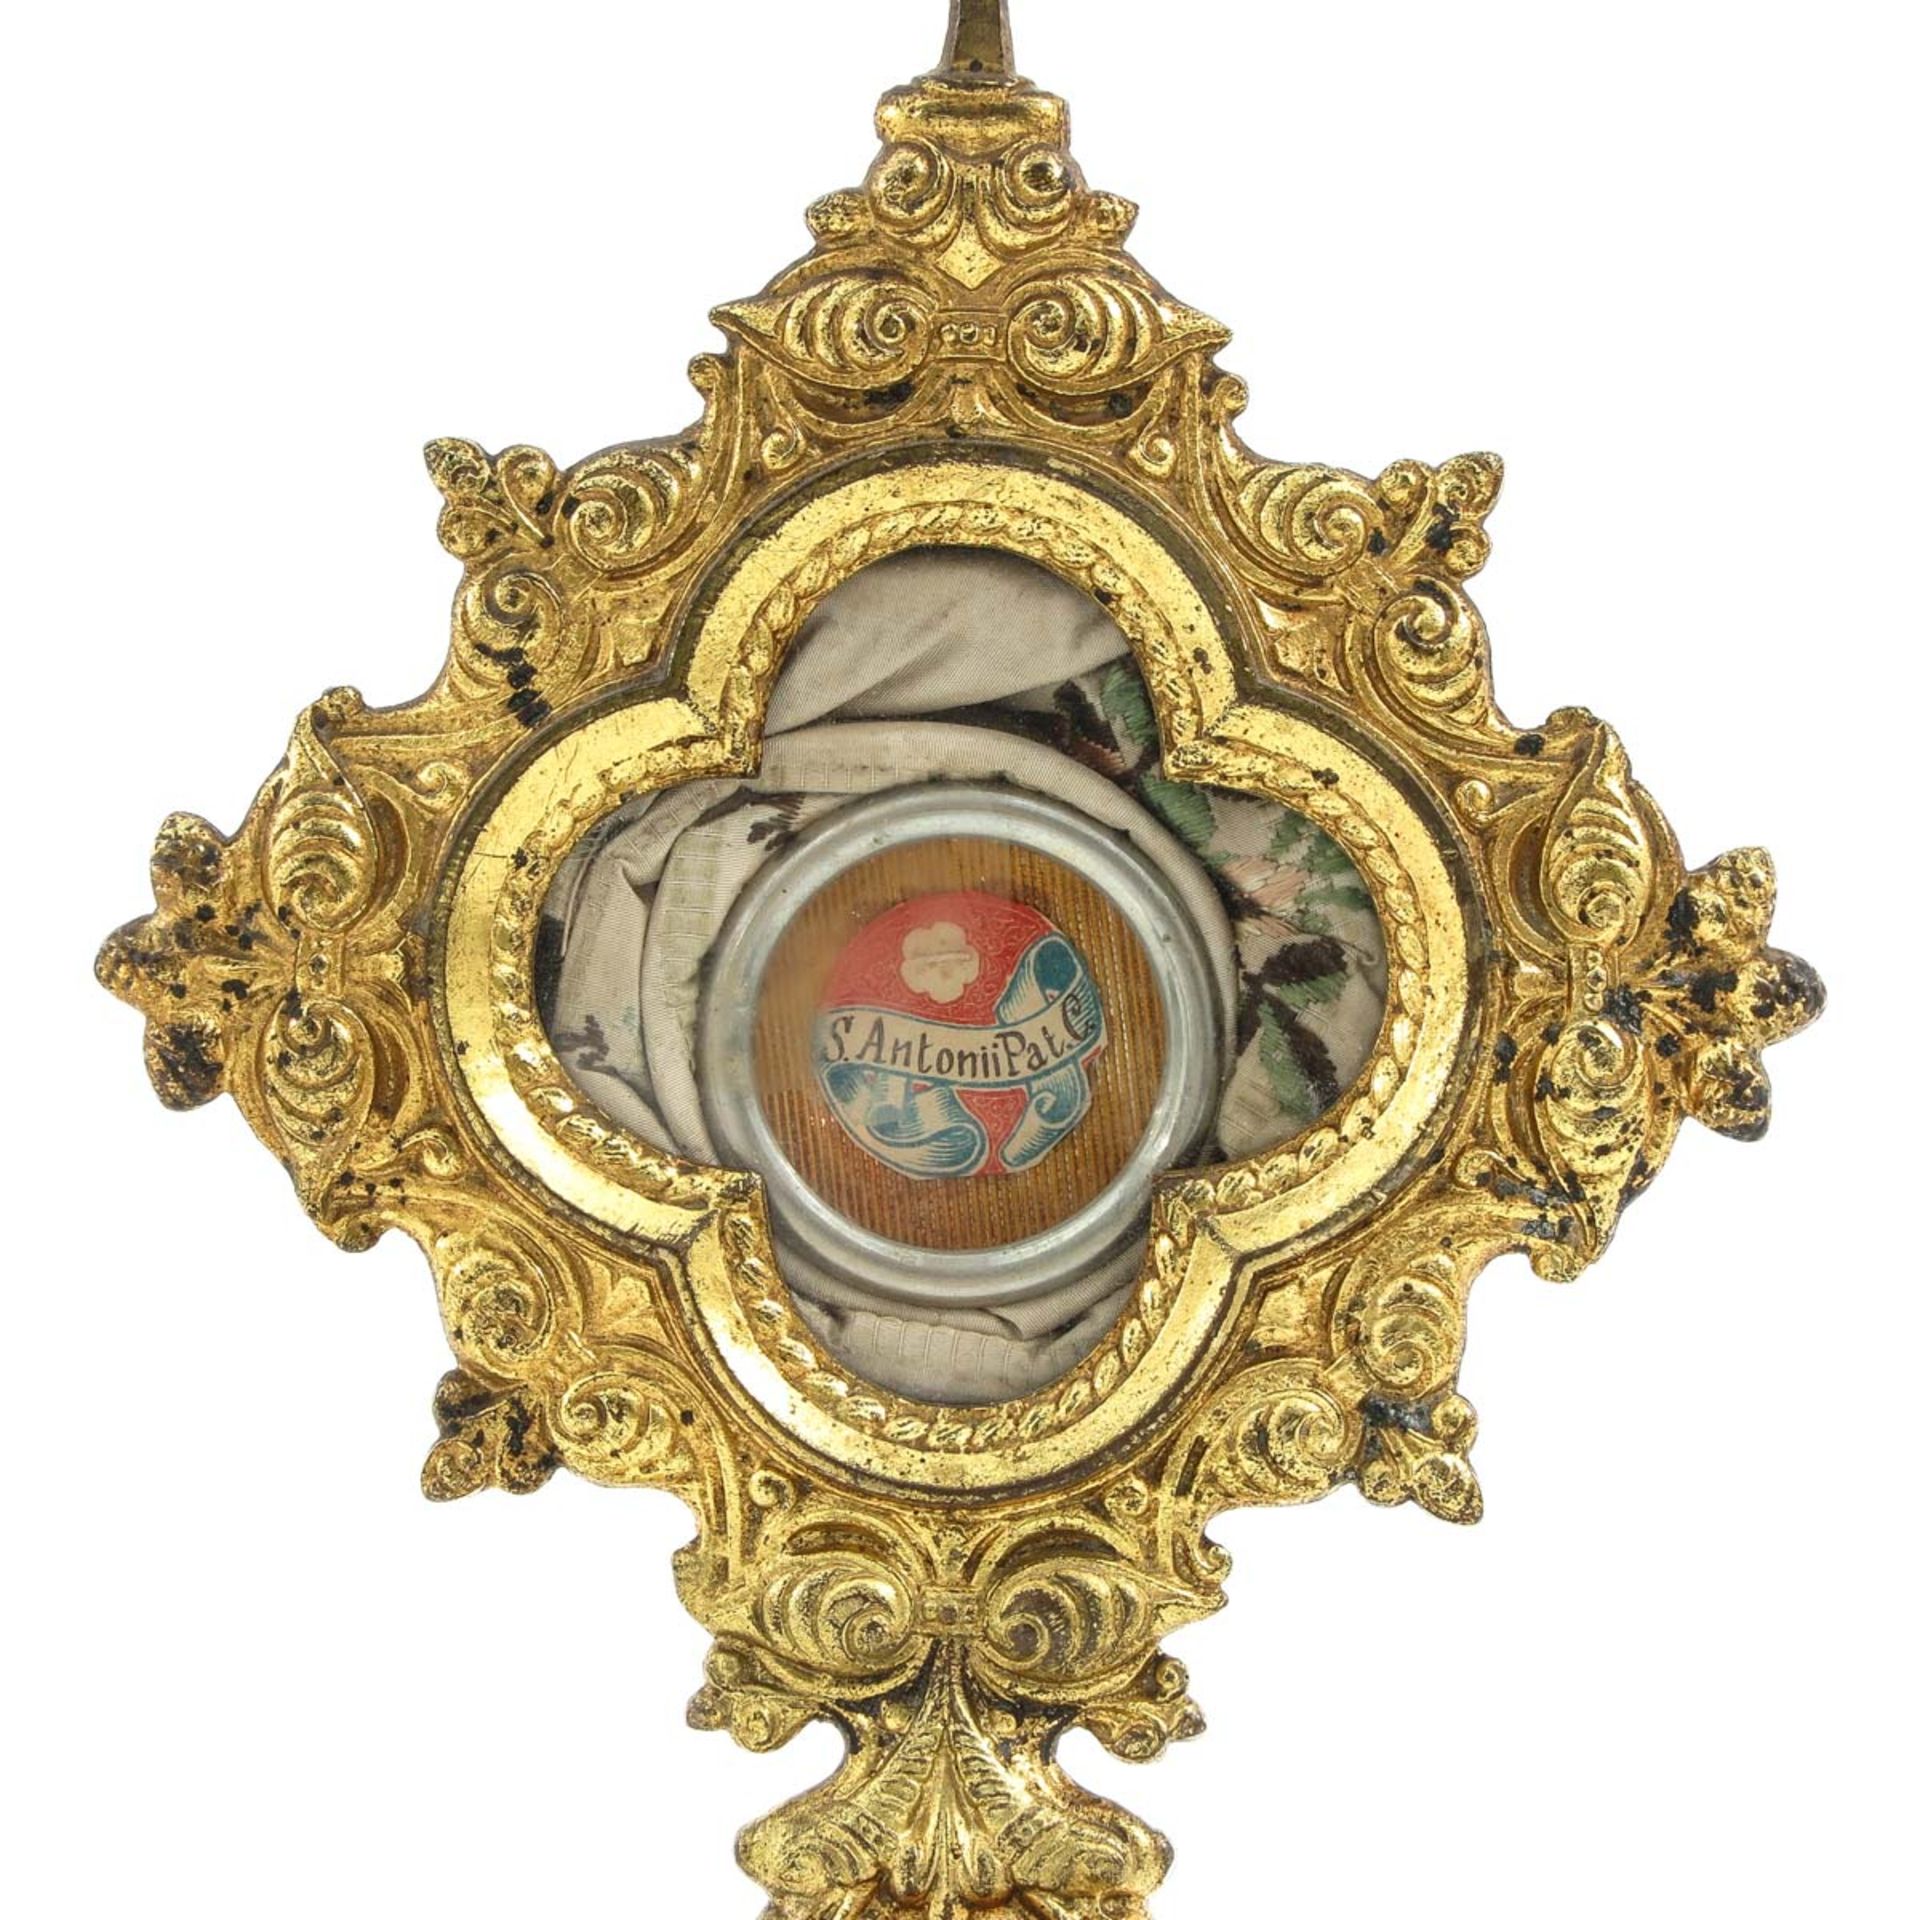 A Bronze Relic Holder with Relic of St. Antoni - Image 7 of 8